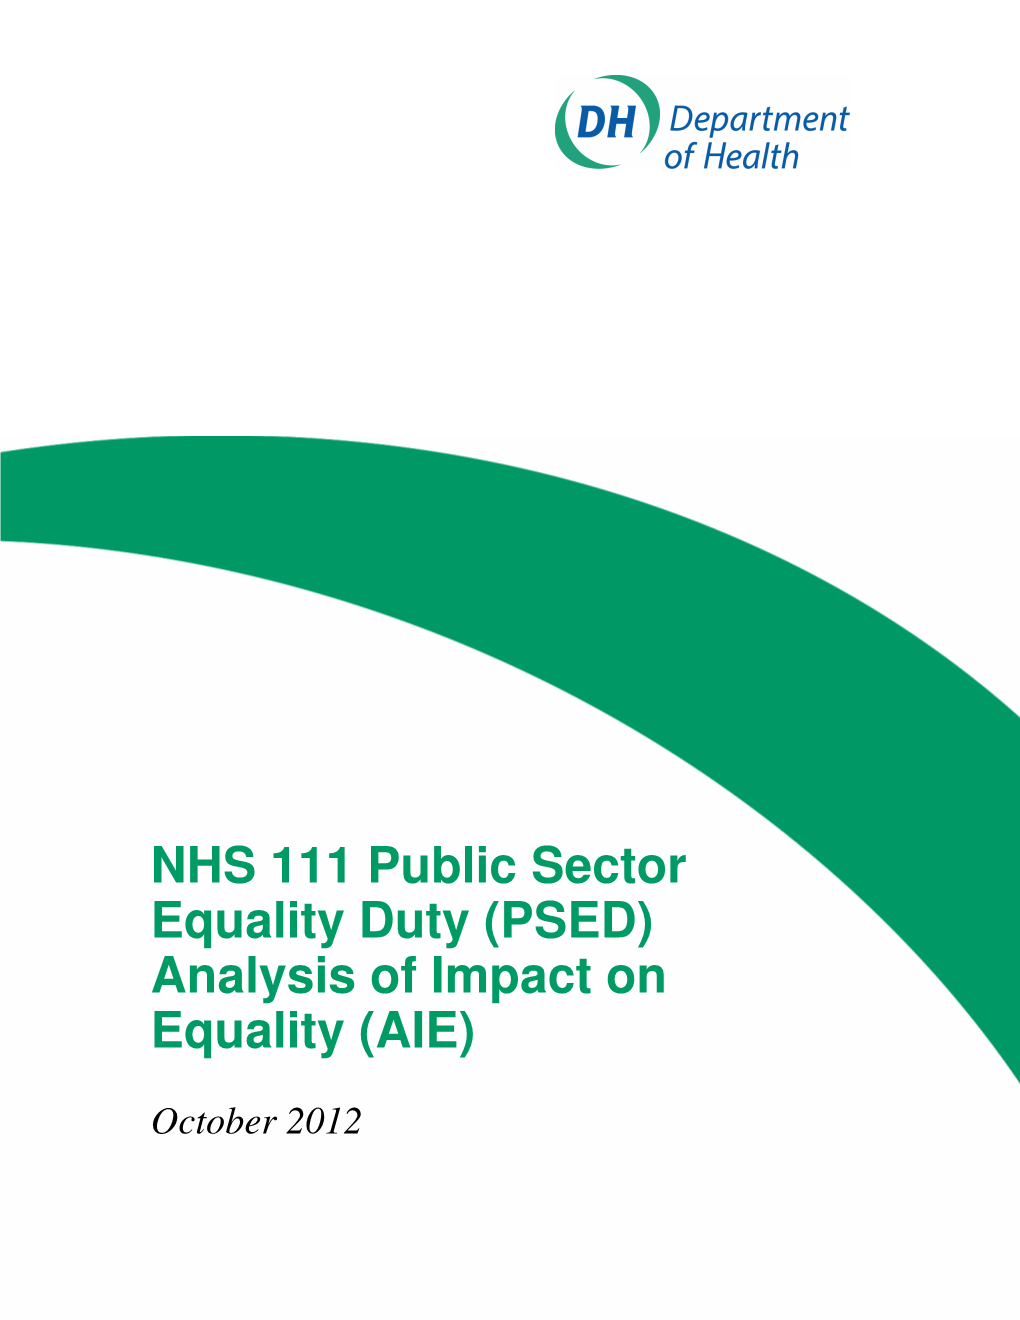 NHS 111 Public Sector Equality Duty (PSED) Analysis of Impact on Equality (AIE)